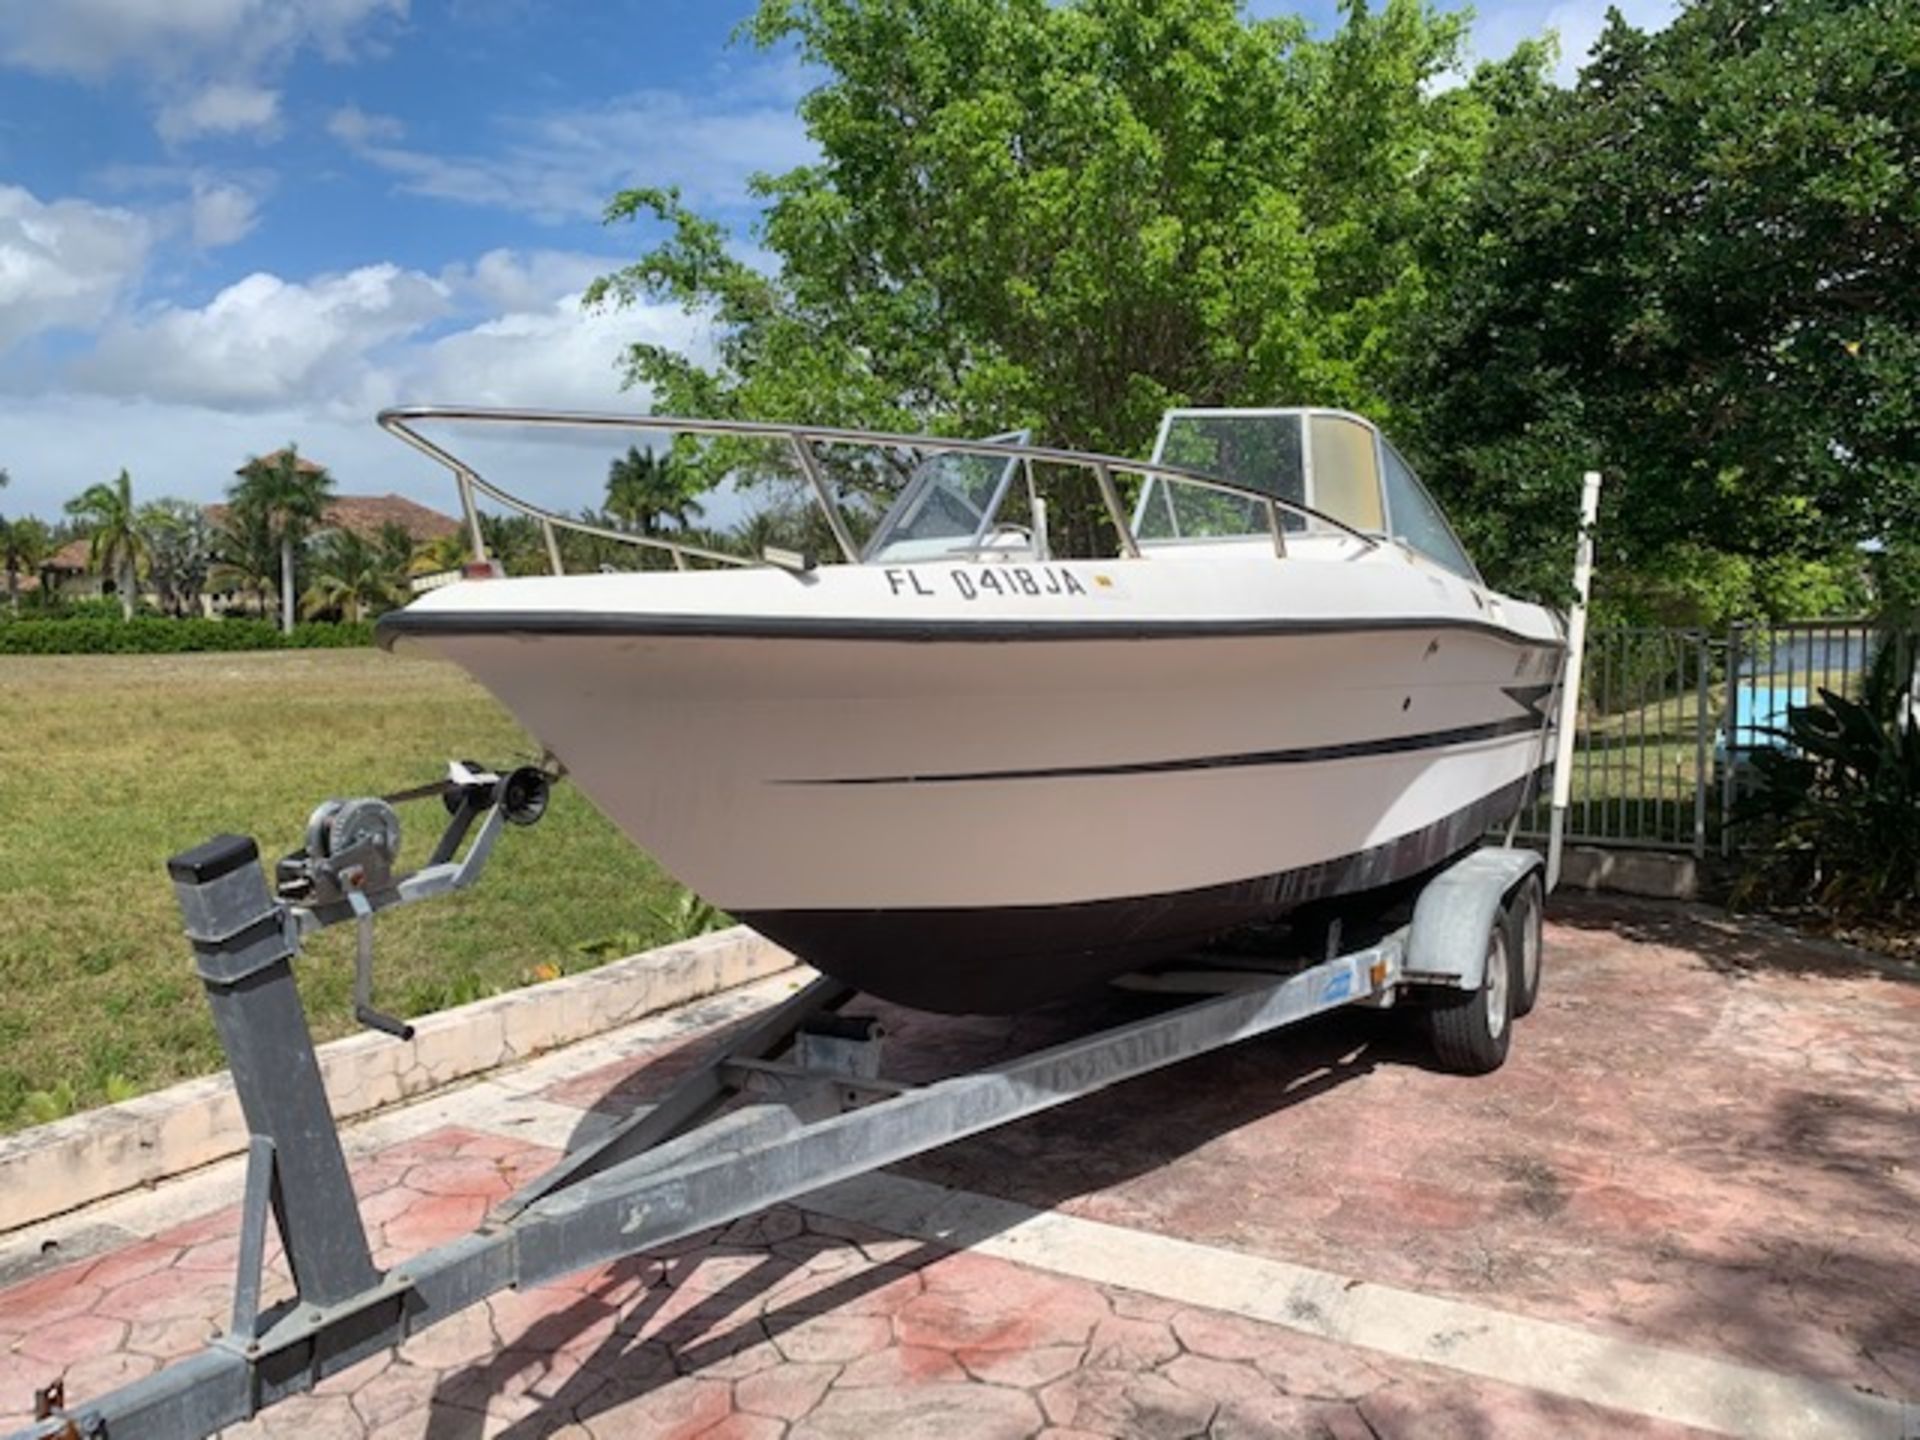 1994 HYDRA SPORT 20' BOW RIDER BOAT - HIN #HSX2D110F395 - WHITE - 1996 150HP EVINRUDE OUTBOARD